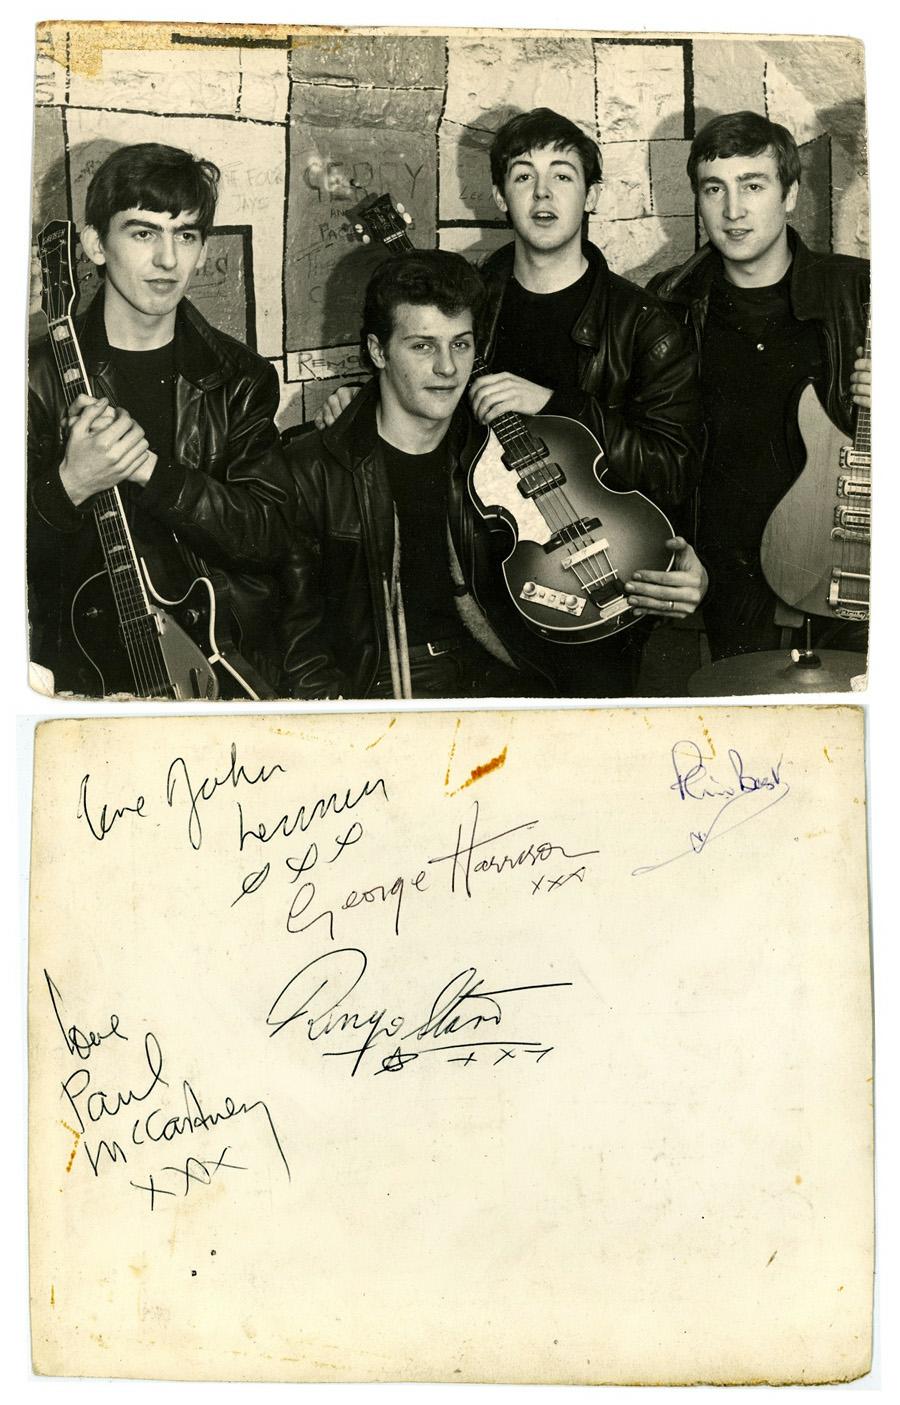 THE BEATLES 8X10 PHOTO MUSIC POP ROCK & ROLL PICTURE PETE BEST 